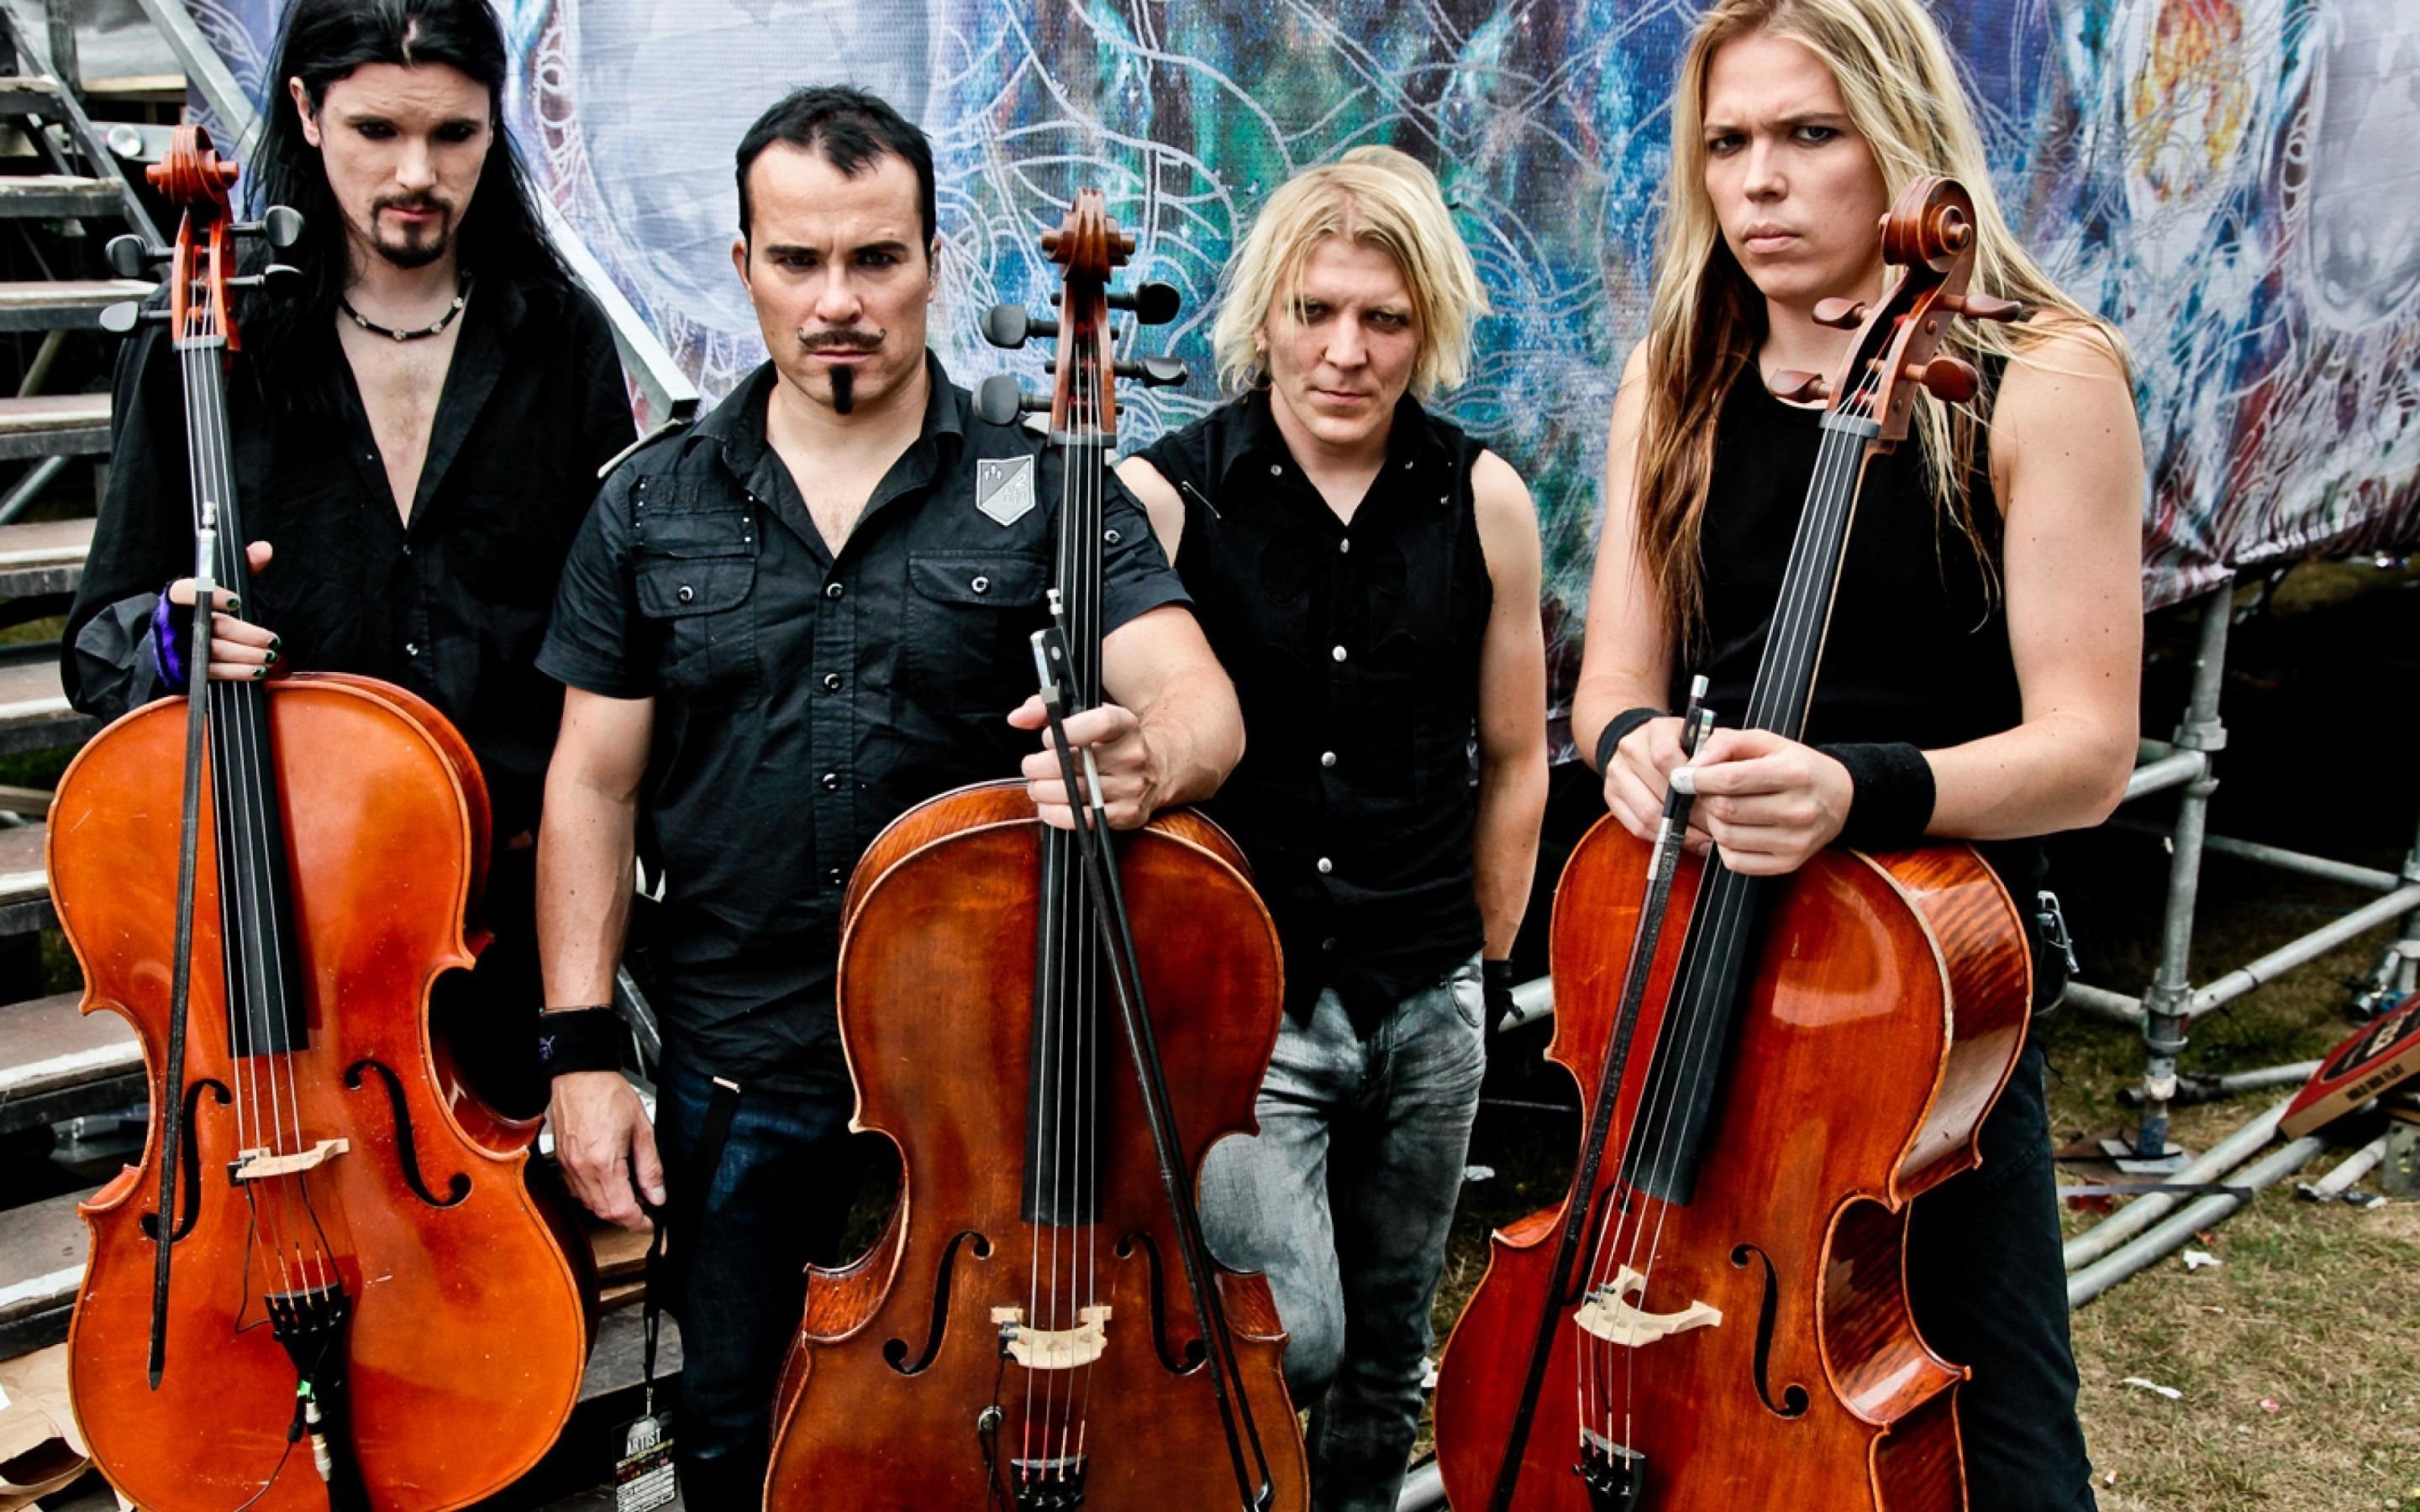 Apocalyptica Wallpapers